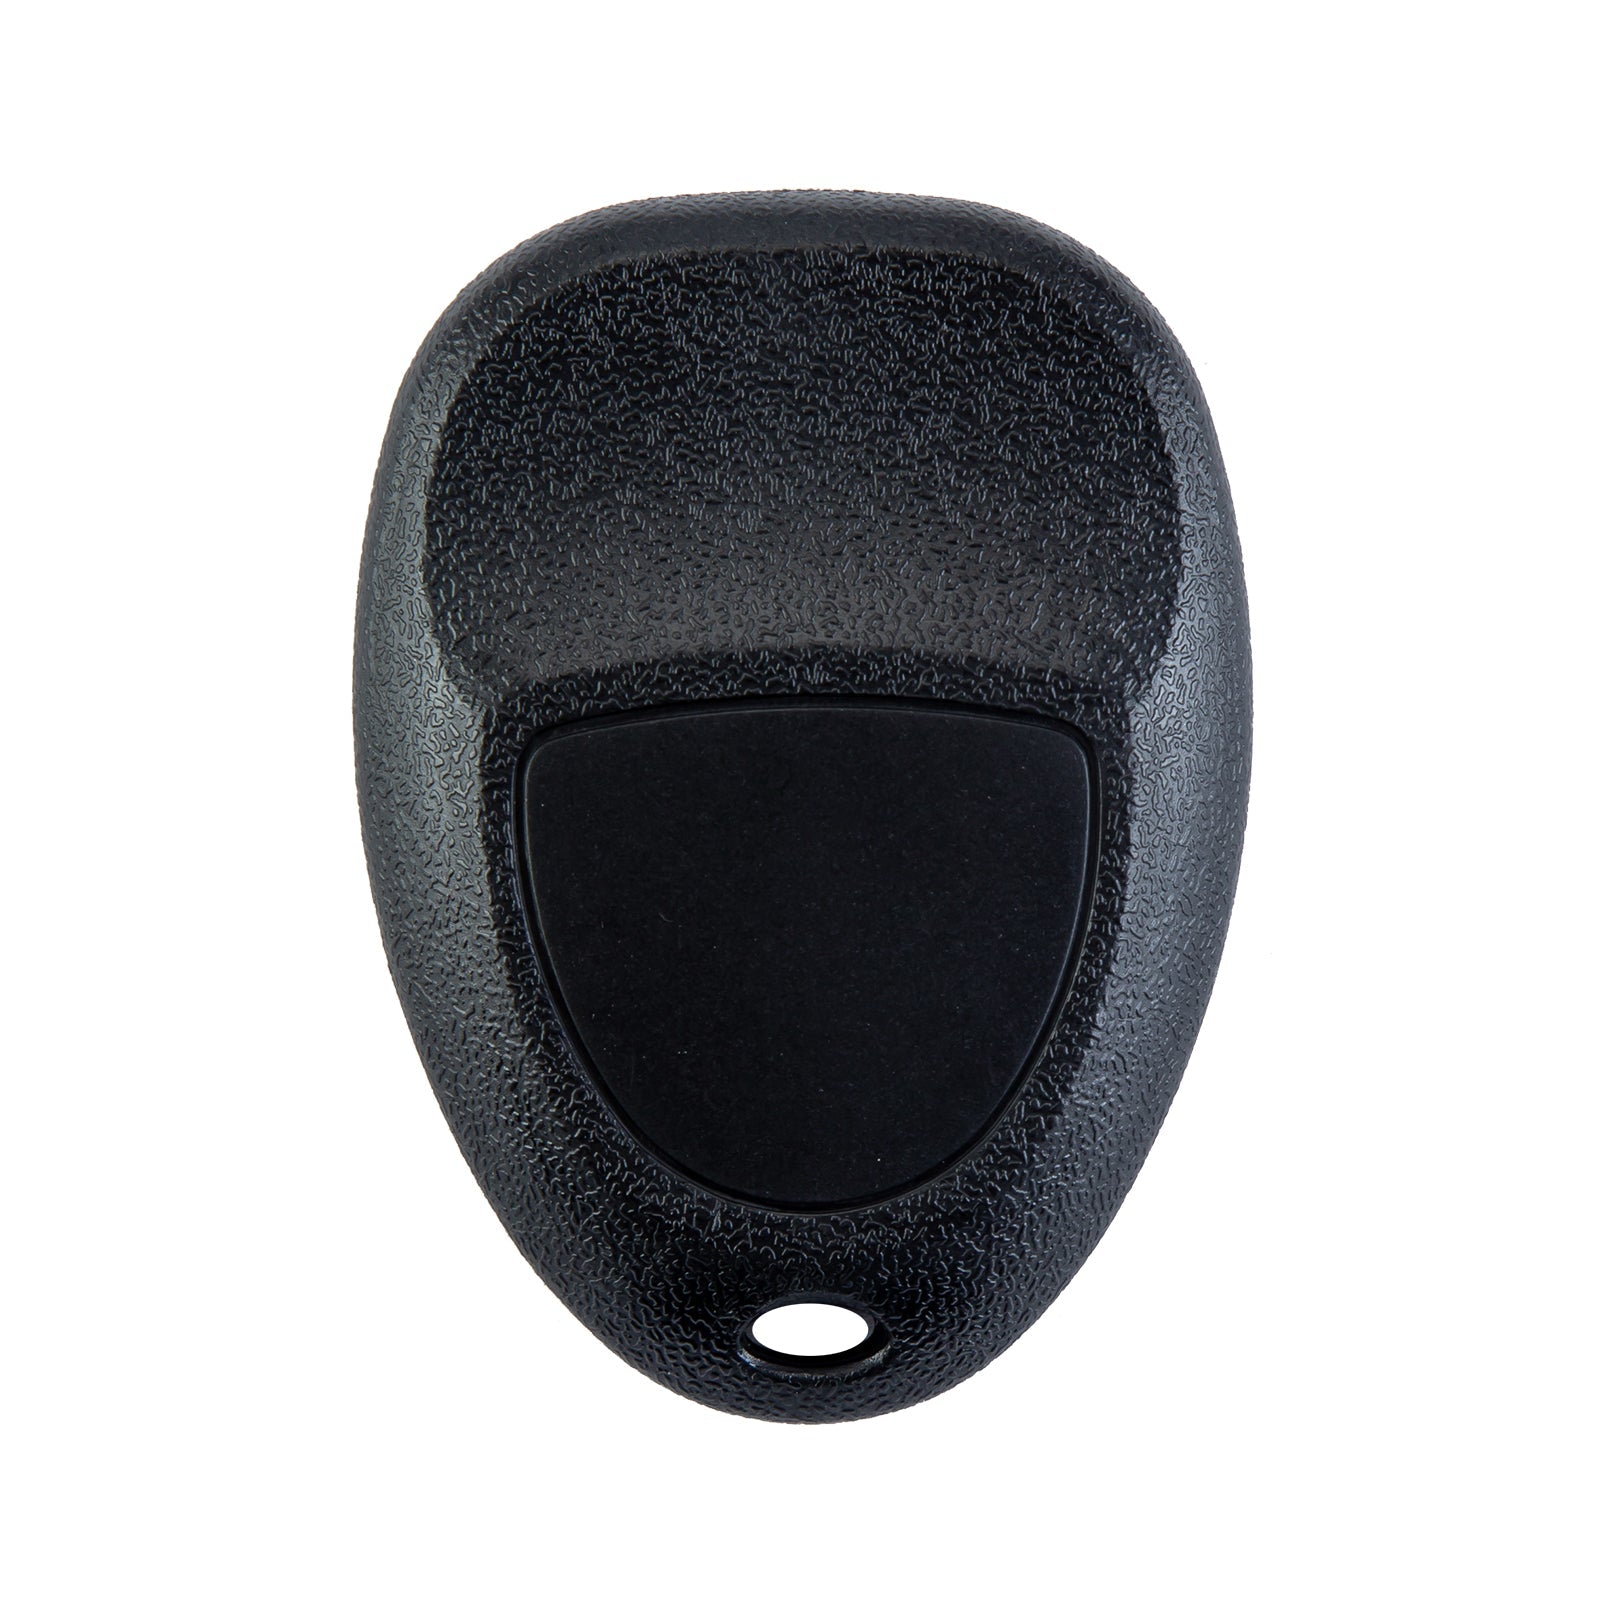 6 Button Keyless Entry Remote Replacement for GMC Yukon Chevrolet Chevy Tahoe Suburban 315MHZ.OUC60270